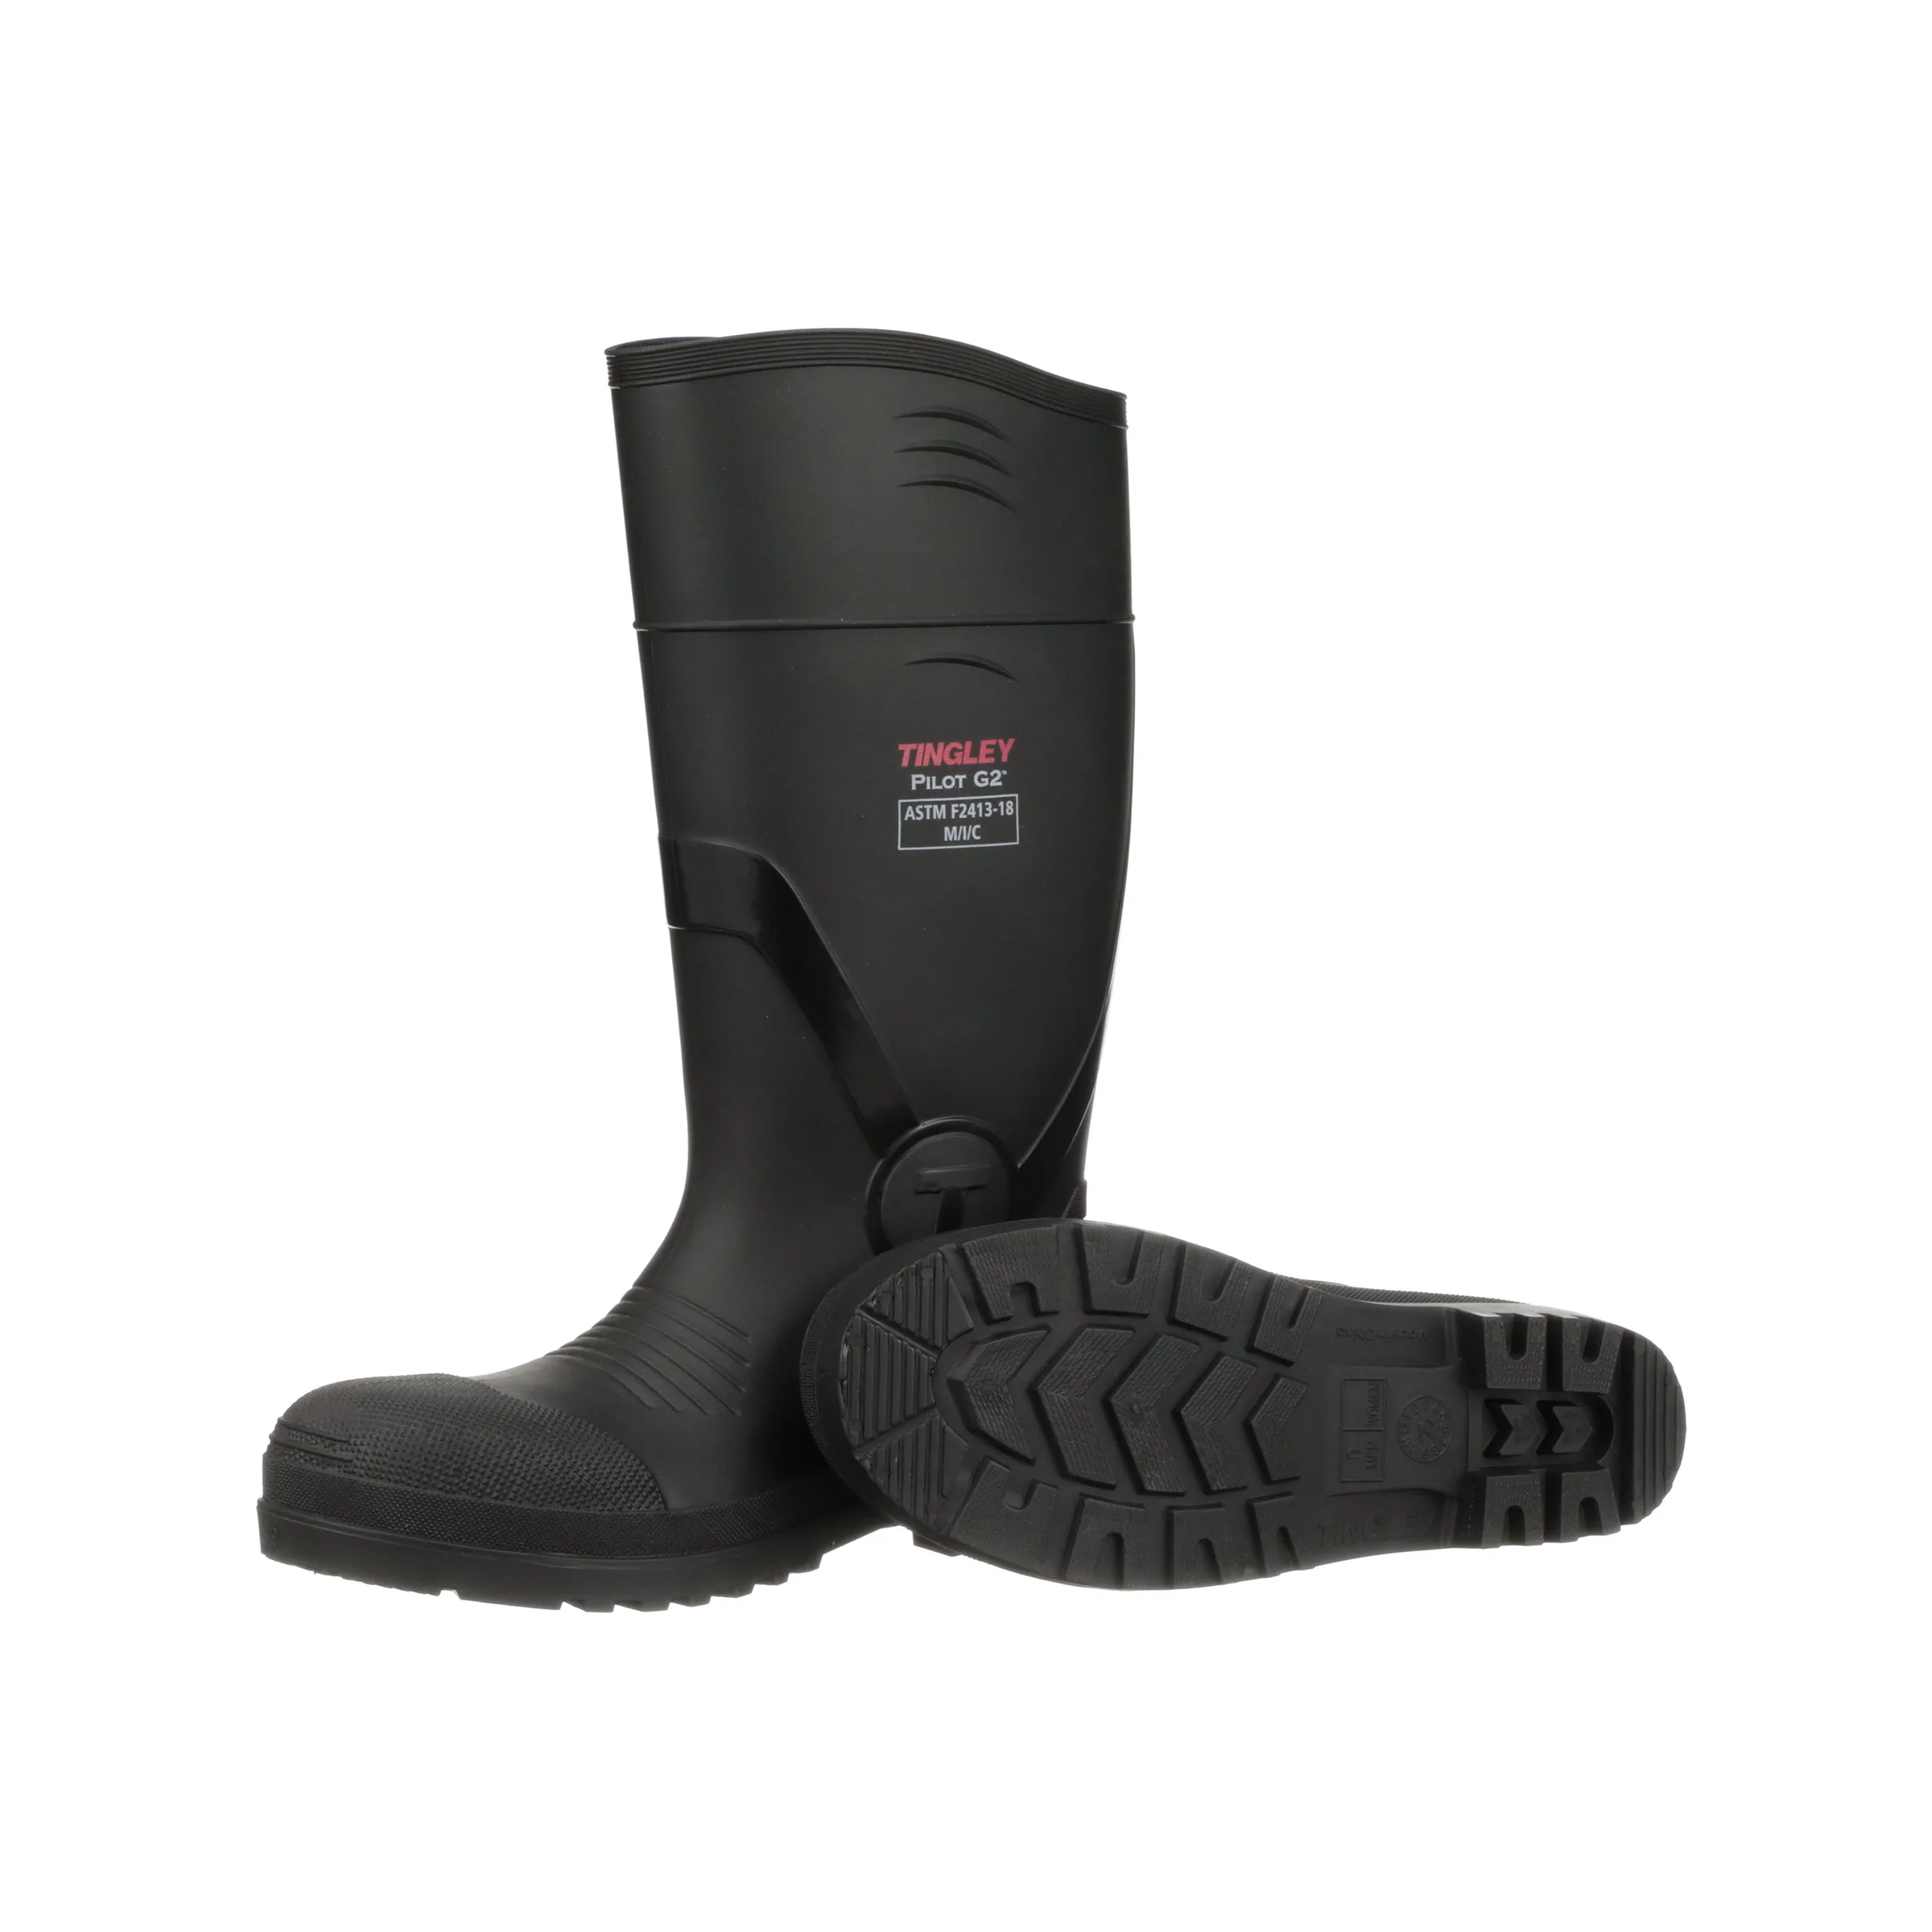 Tingley Pilot G2 15 Inch Knee Rubber Work Boots with Composite Safety Toe from Columbia Safety